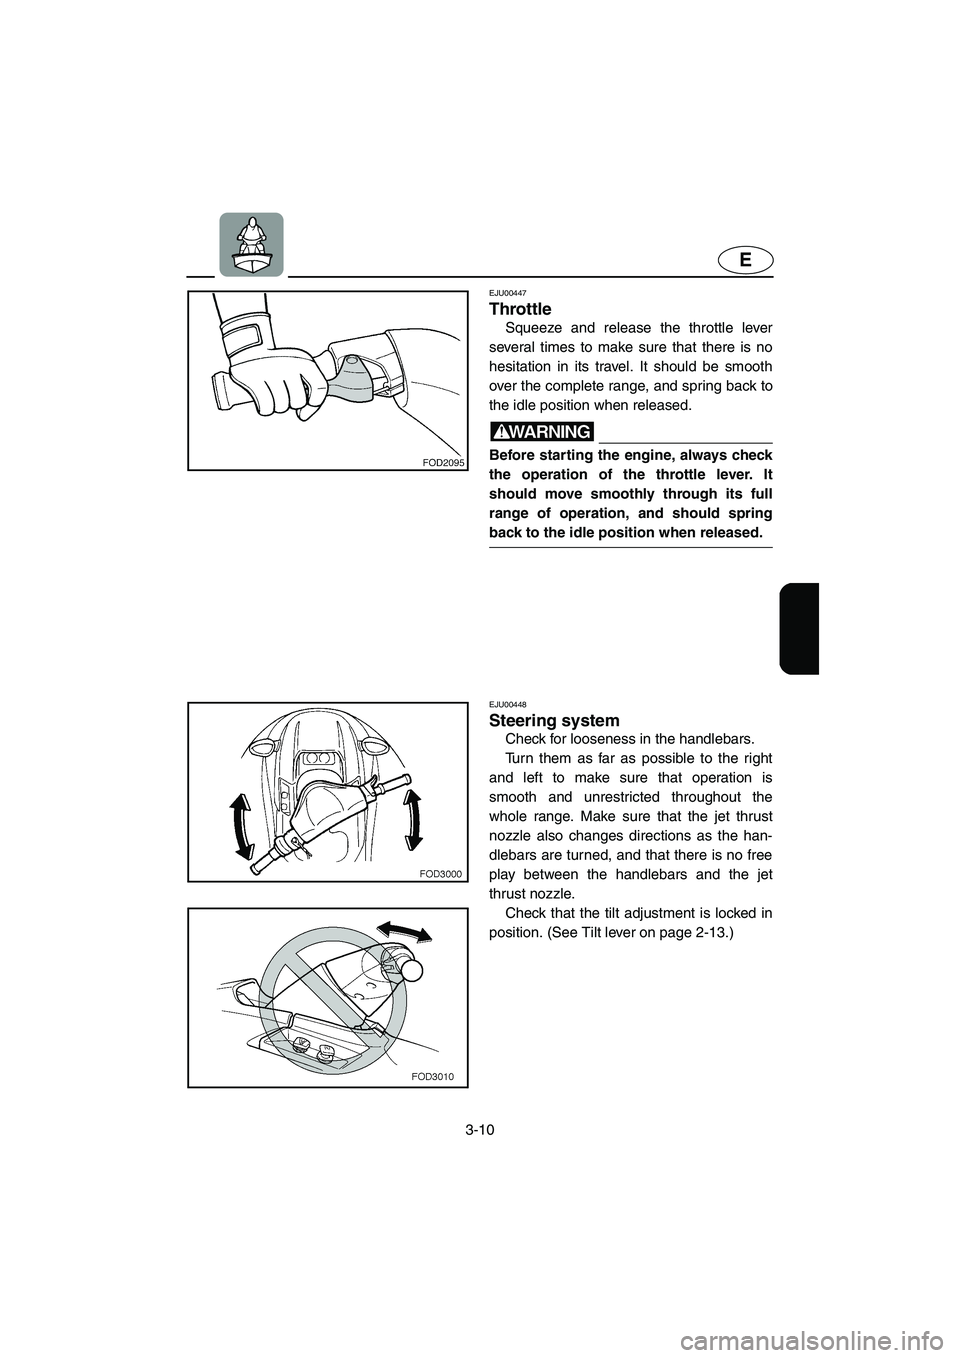 YAMAHA XL 800 2001  Owners Manual 3-10
E
EJU00447
Throttle
Squeeze and release the throttle lever
several times to make sure that there is no
hesitation in its travel. It should be smooth
over the complete range, and spring back to
th